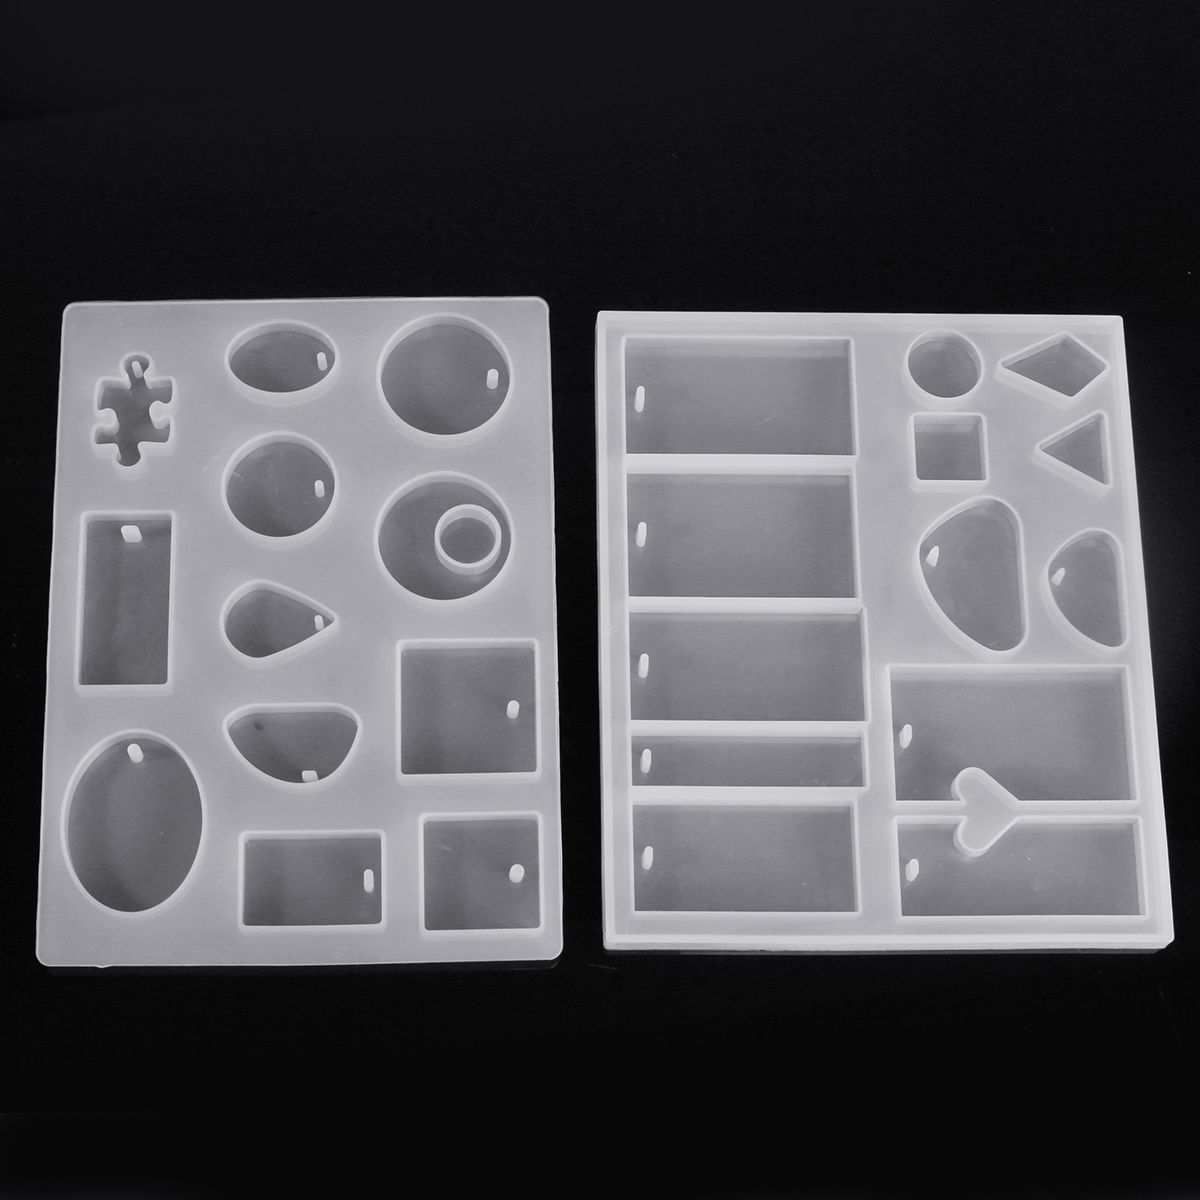 214277Pc-DIY-Craft-Resin-Casting-Mold-Kit-Silicone-Making-Jewelry-Pendant-Mould-1664280